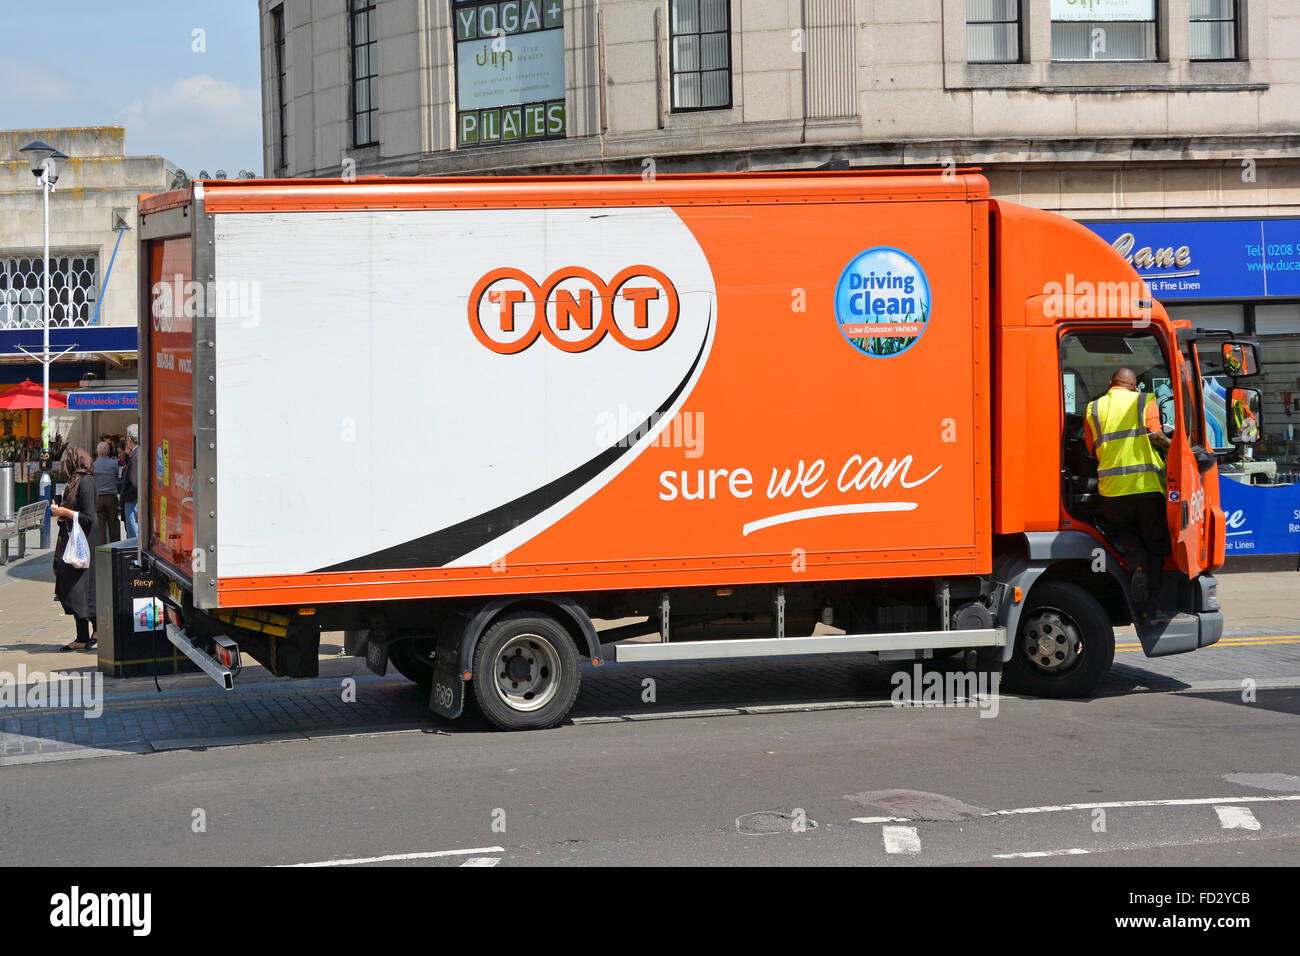 TNT "Driving Clean" delivery van and driver parked in Wimbledon London to make a delivery Stock Photo